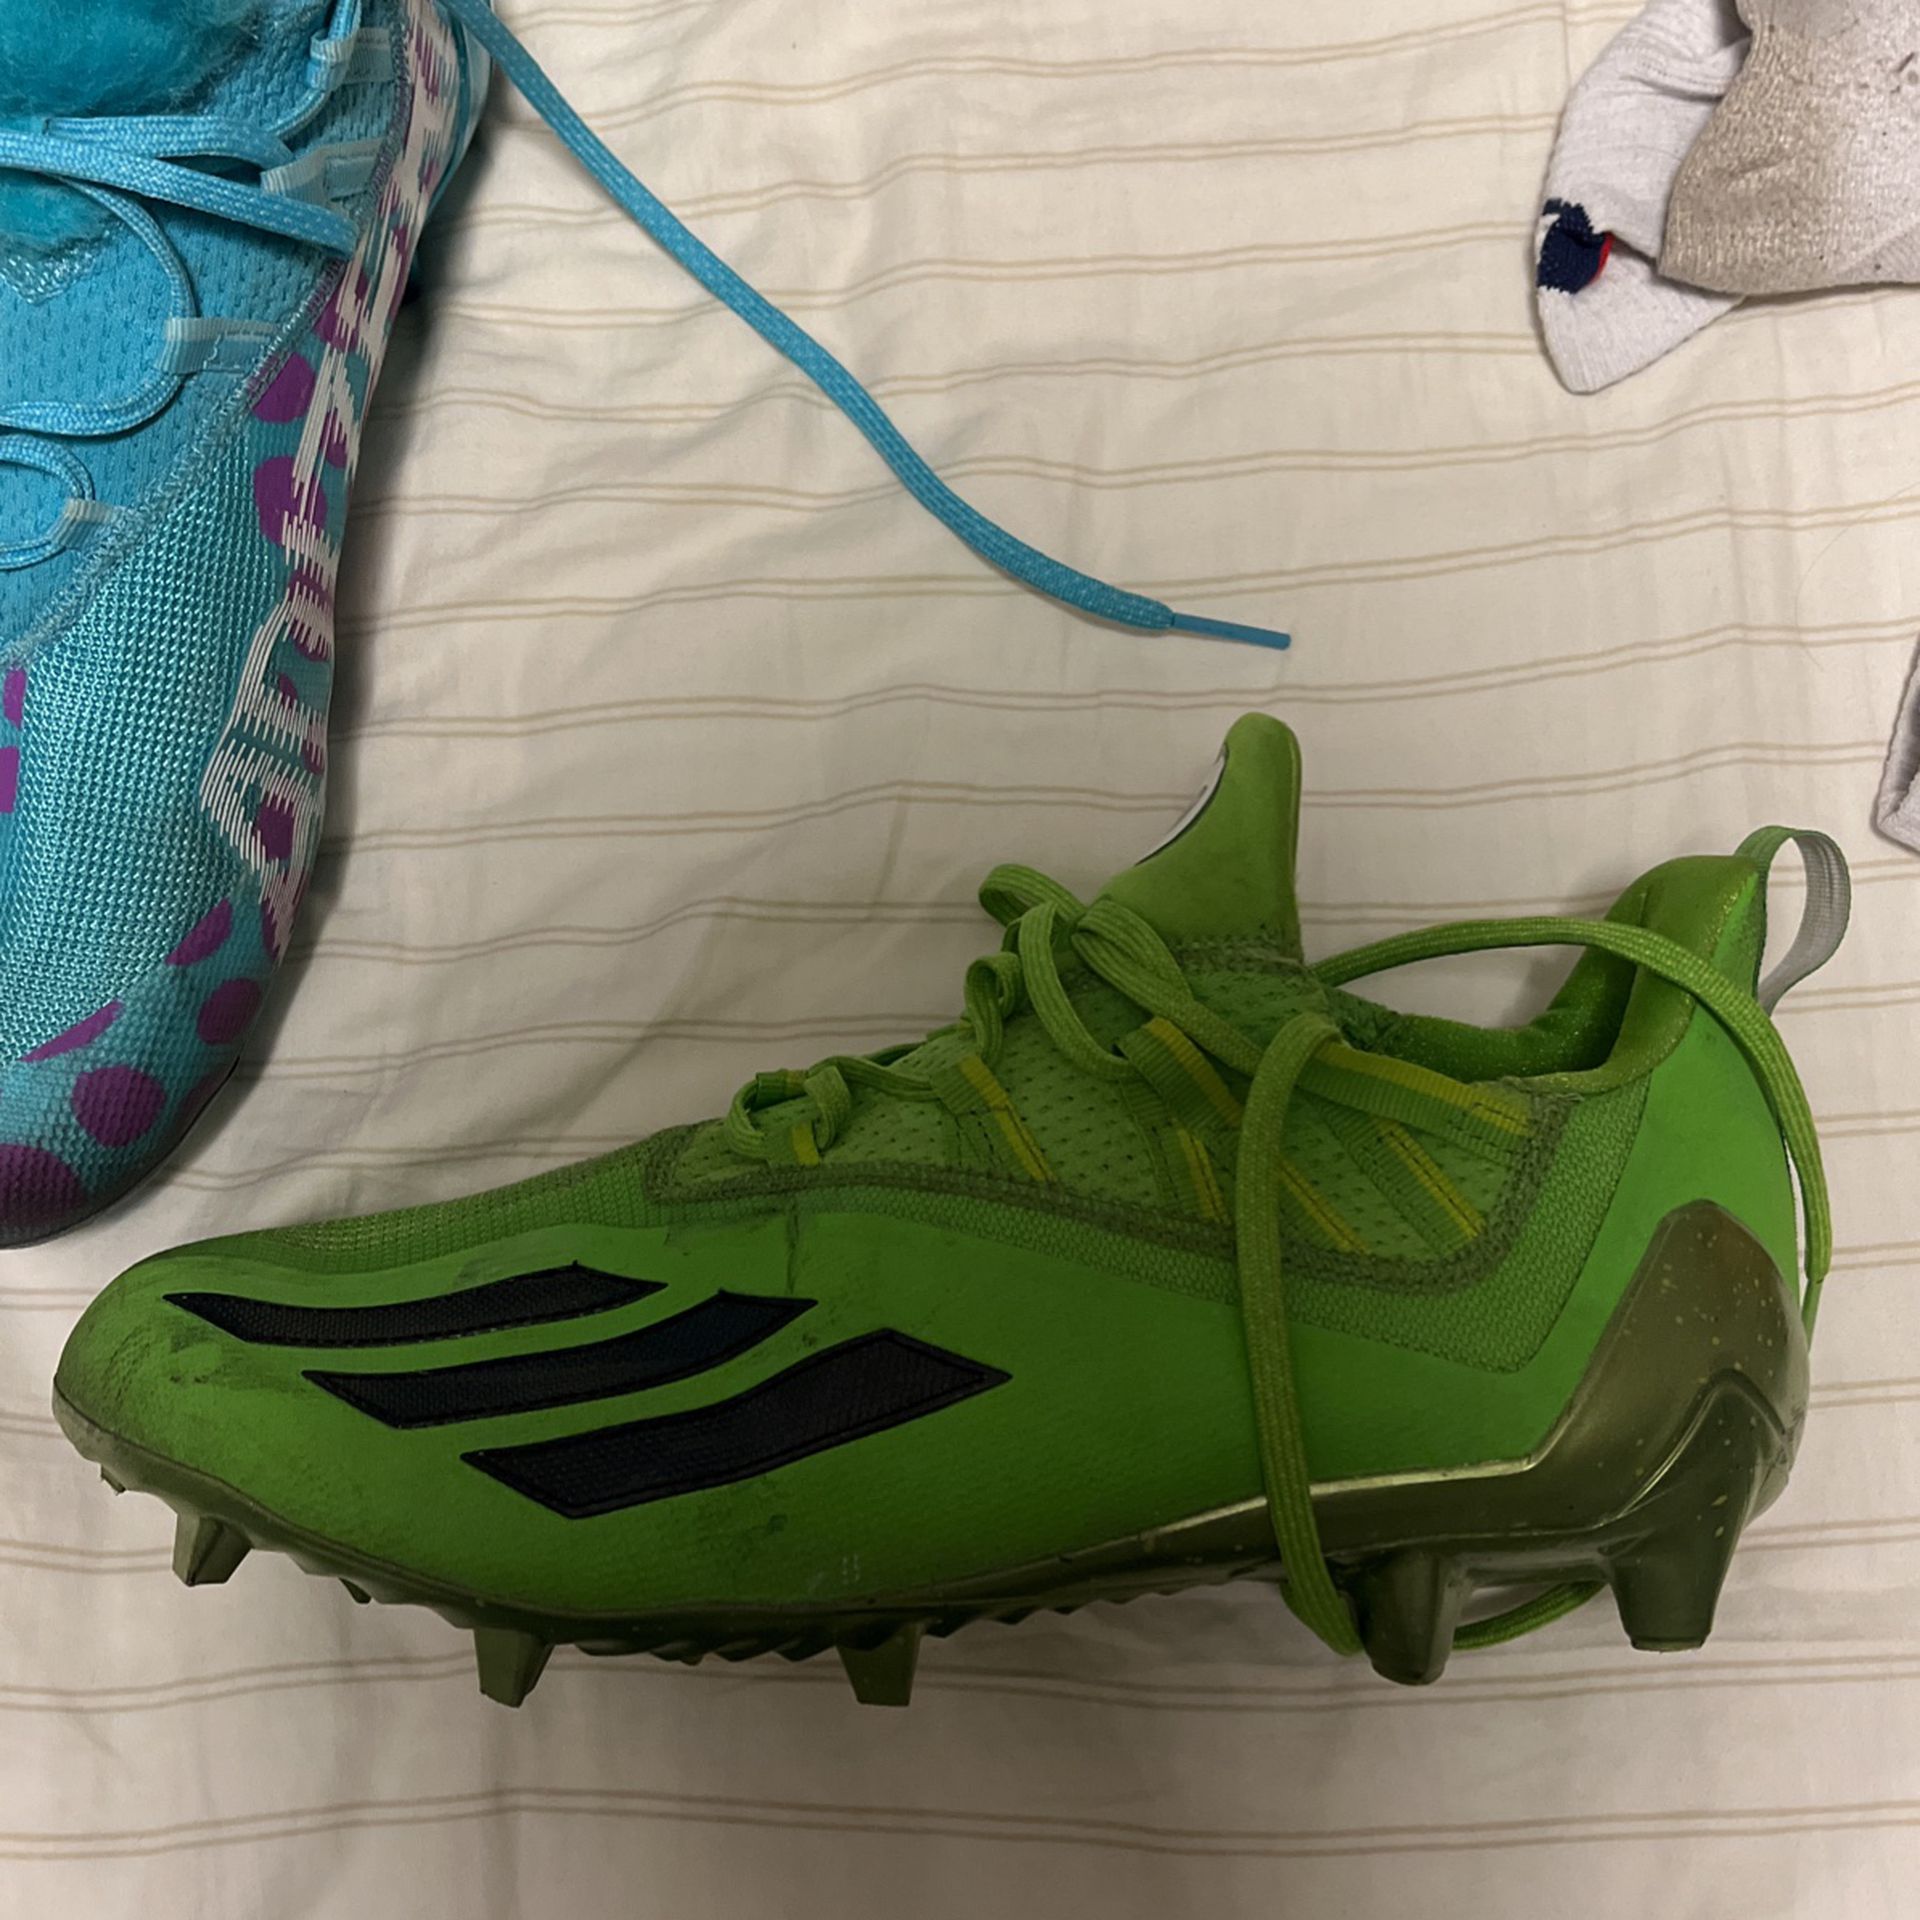 MONSTERS INC. X ADIZERO CLEATS 'MIKE & SULLEY' SIZE 11 shoot me a offer ...